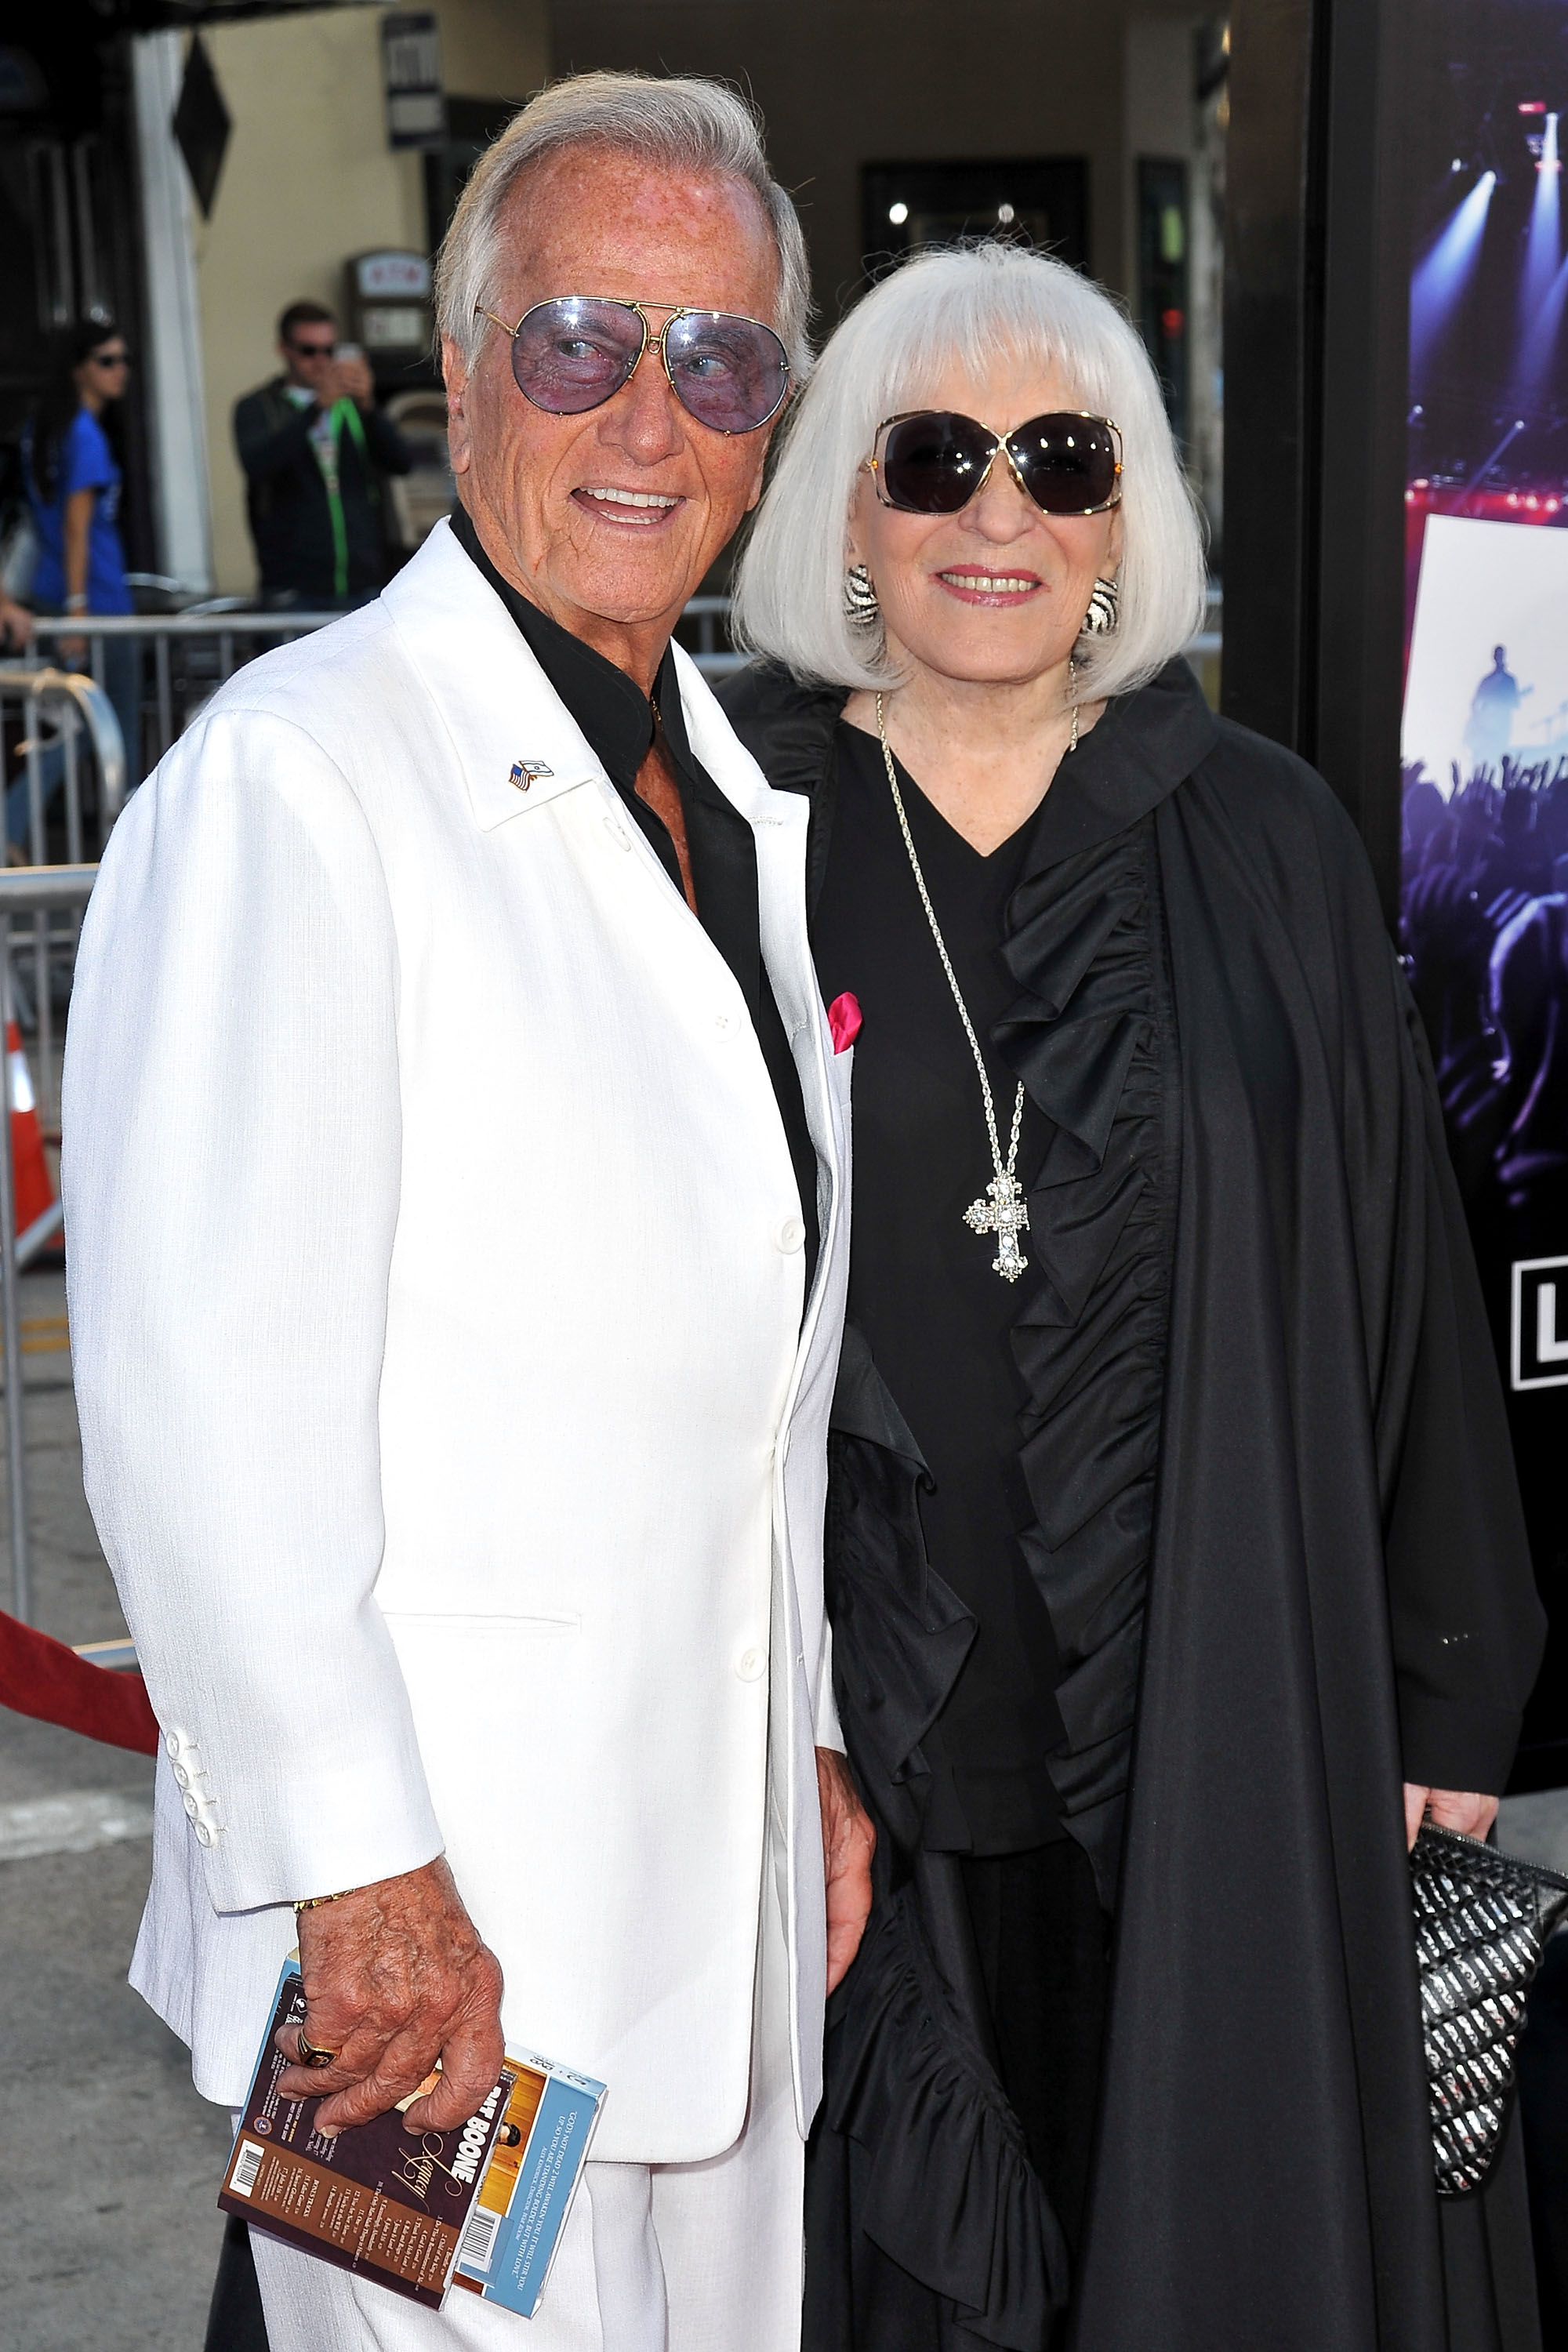 Pat Boone and Shirley Boone arrive at the Premiere Of Pure Flix Entertainment's 'Hillsong: Let Hope Rise' at Mann Village Theatre on September 13, 2016 in Westwood, California. | Source: Getty Images